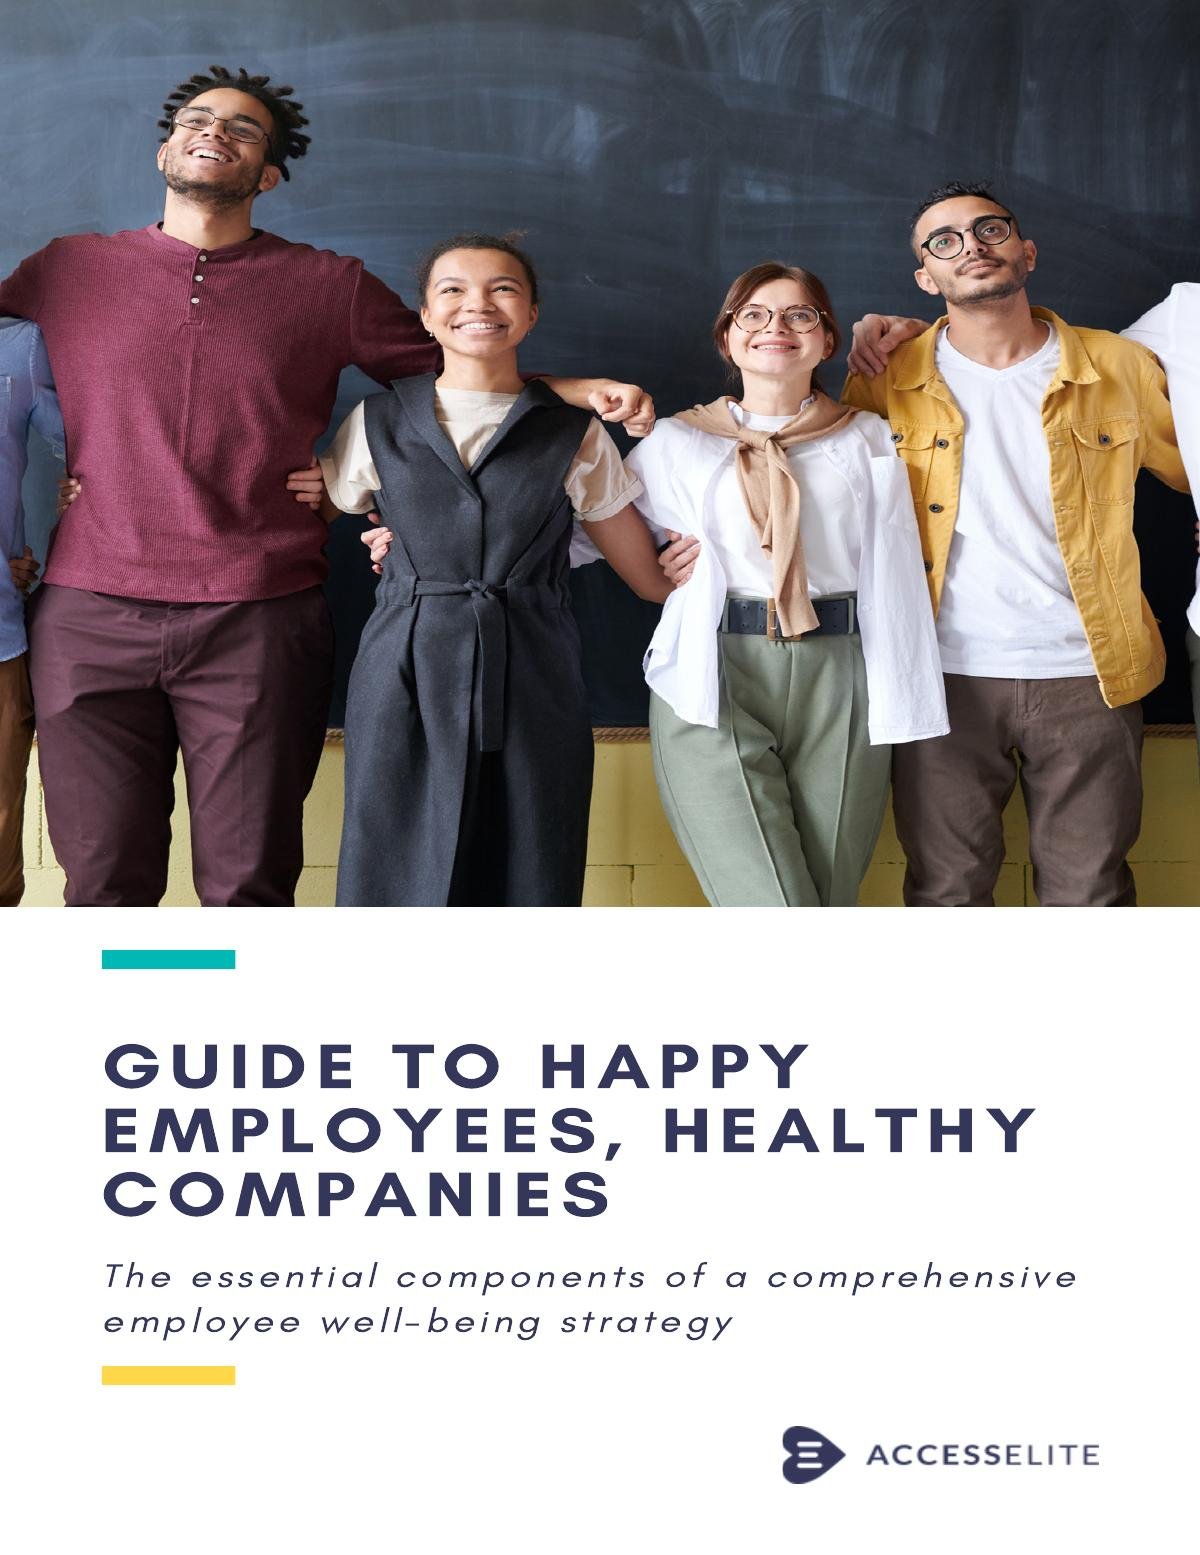 Your Guide to Happy Employees, Healthy Companies